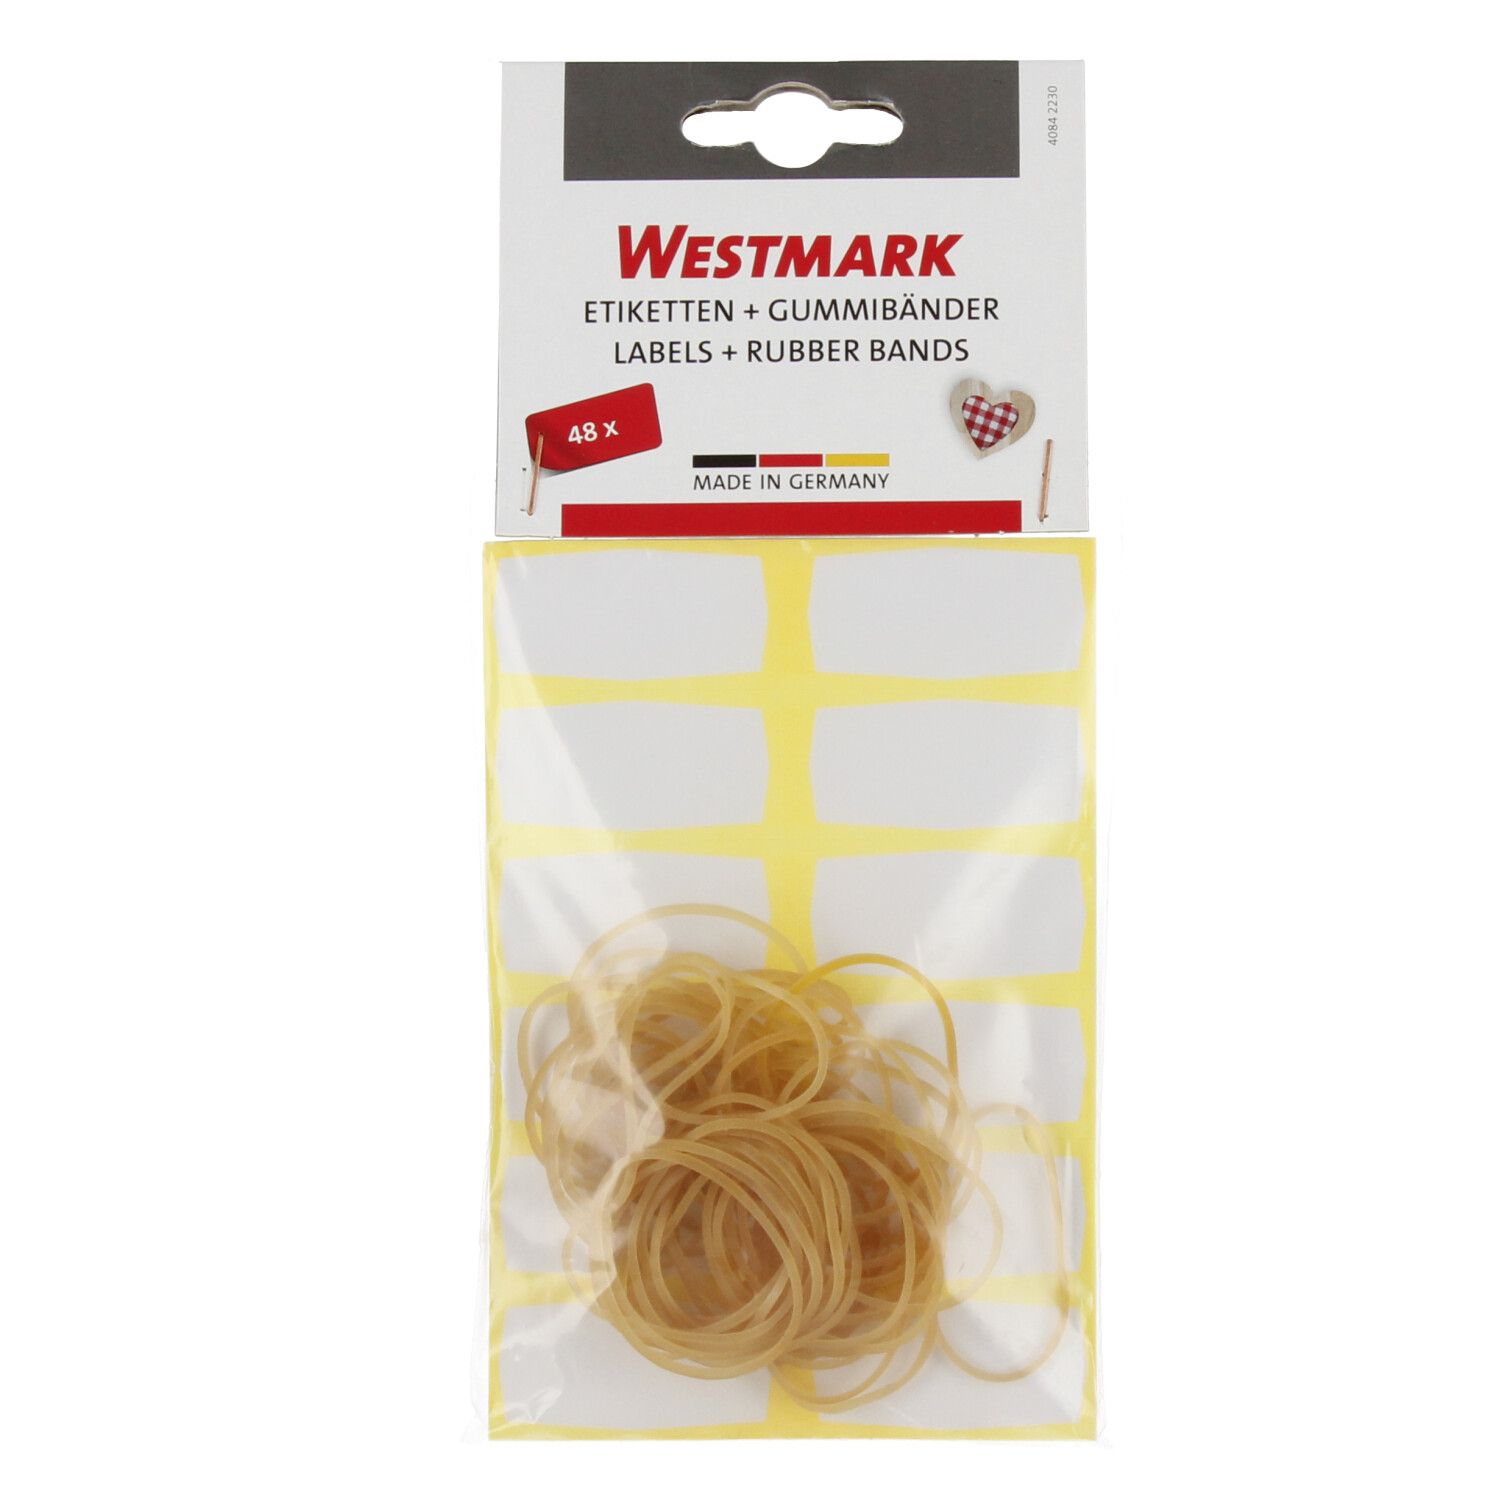 Self-adhesive Labels and rubber bands Westmark